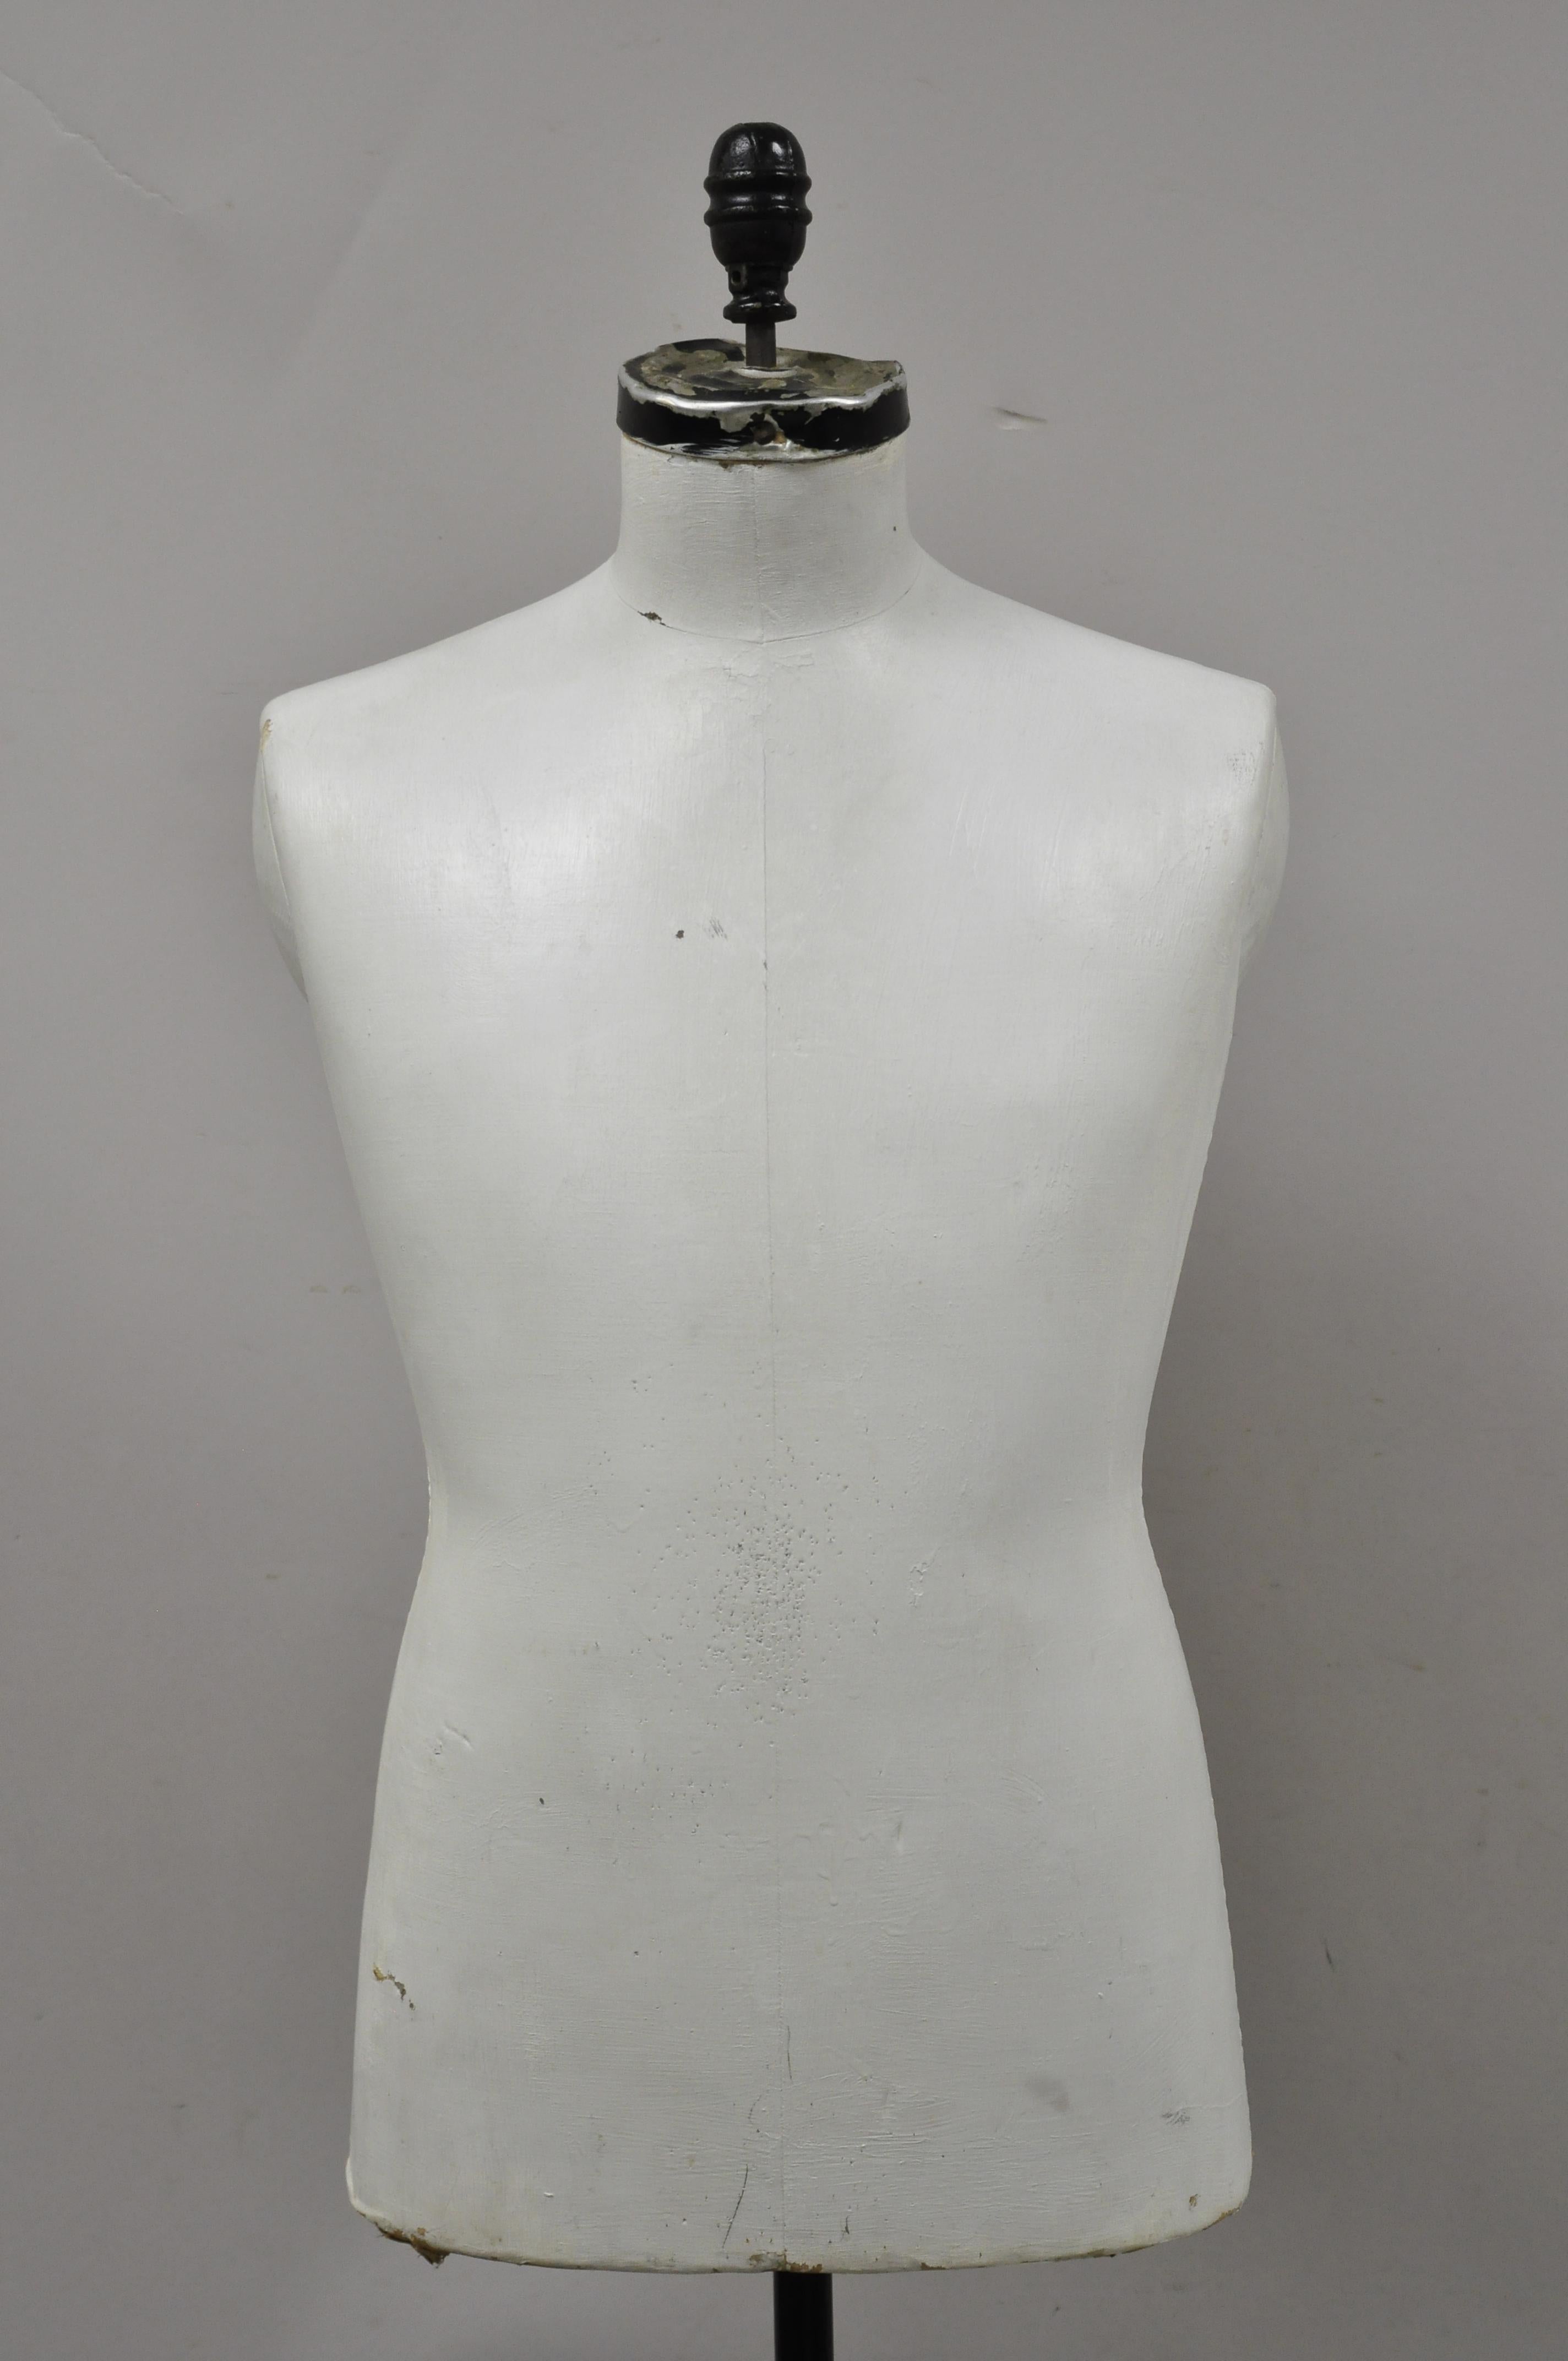 Vintage Cavanaugh Model Male dress form mannequin cast iron display. Item features white painted canvas male body, adjustable height cast iron base on wheels, original stamp, very nice vintage item, quality American craftsmanship, great style and